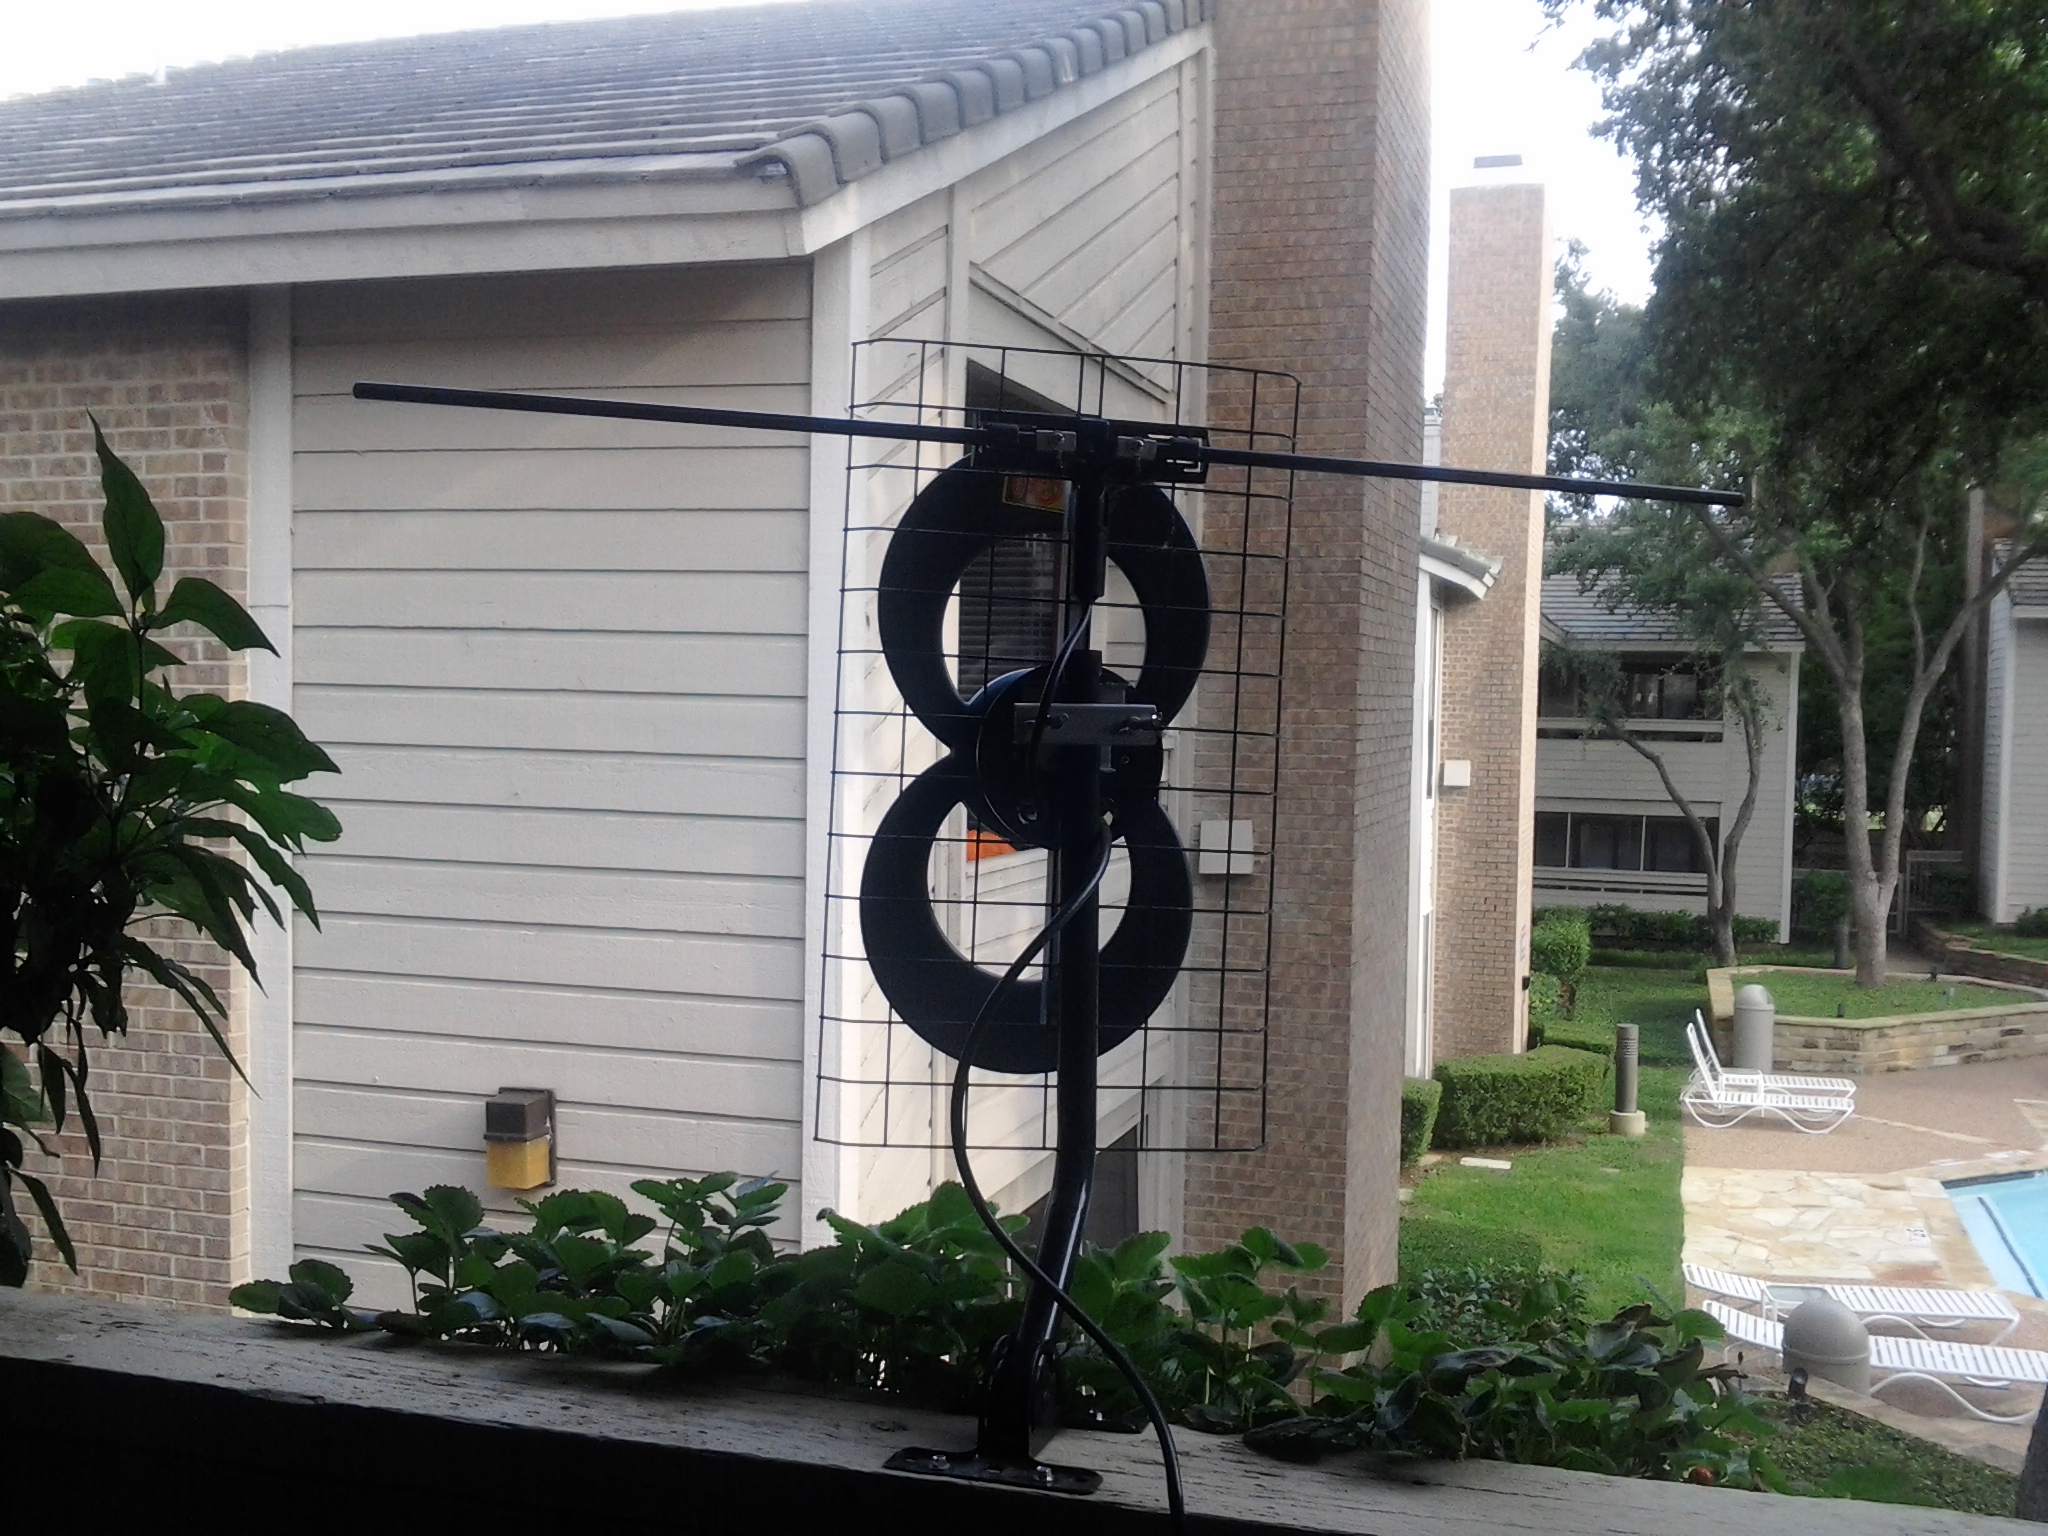 Results image of ClearStream2 antenna mounted on porch